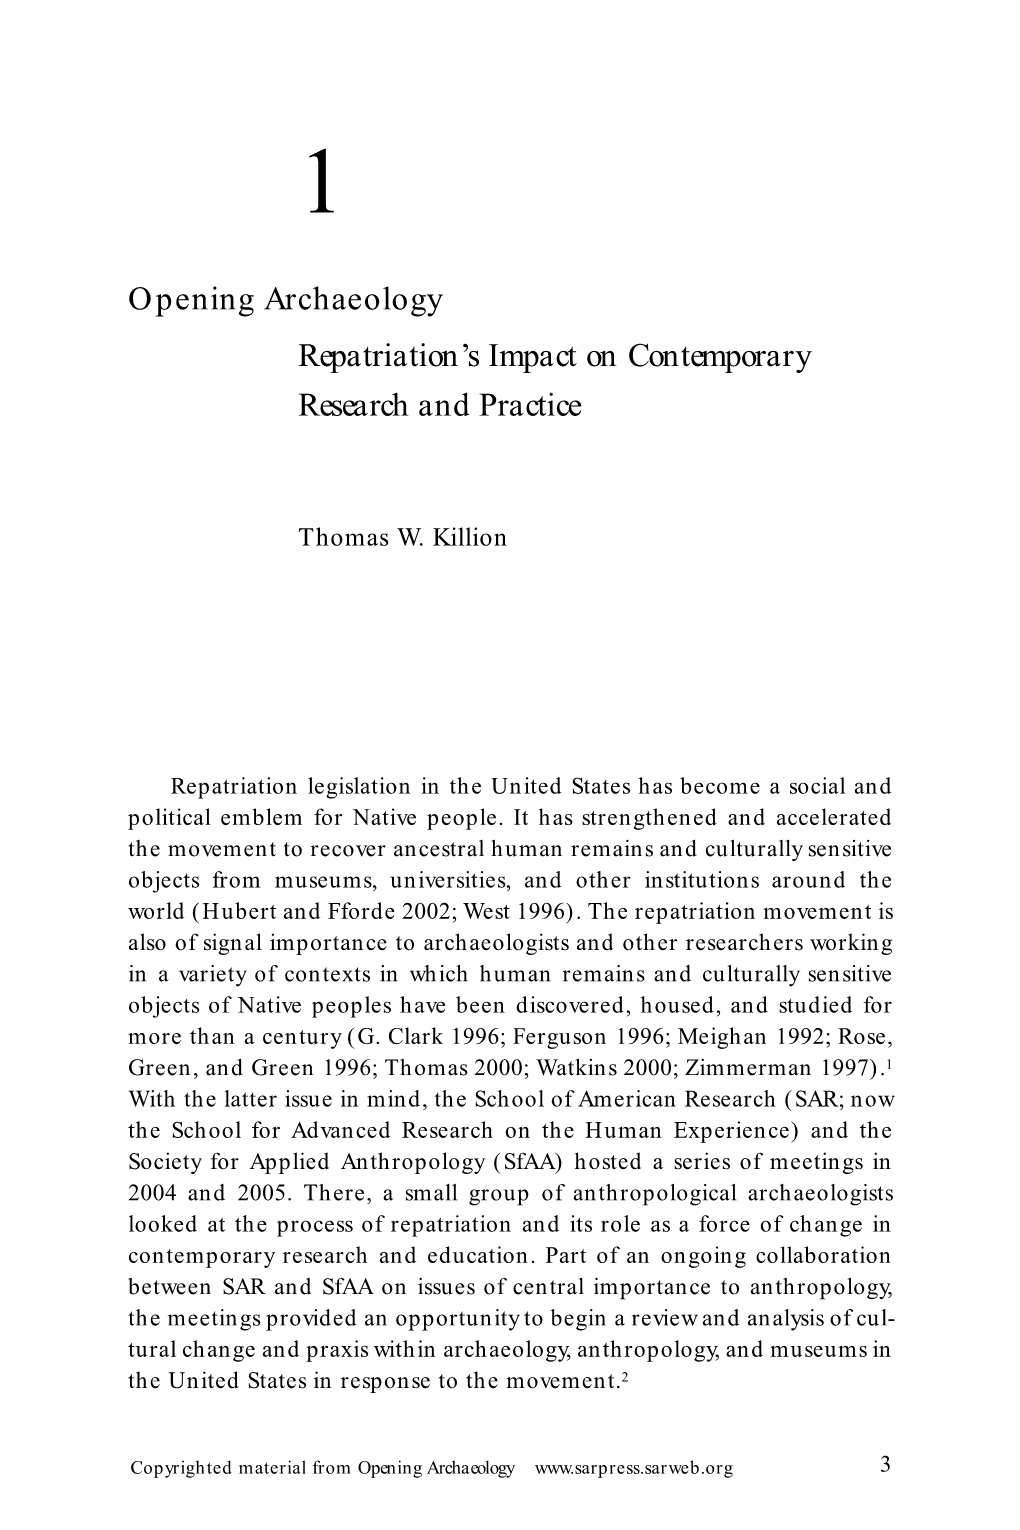 Opening Archaeology Repatriation's Impact on Contemporary Research